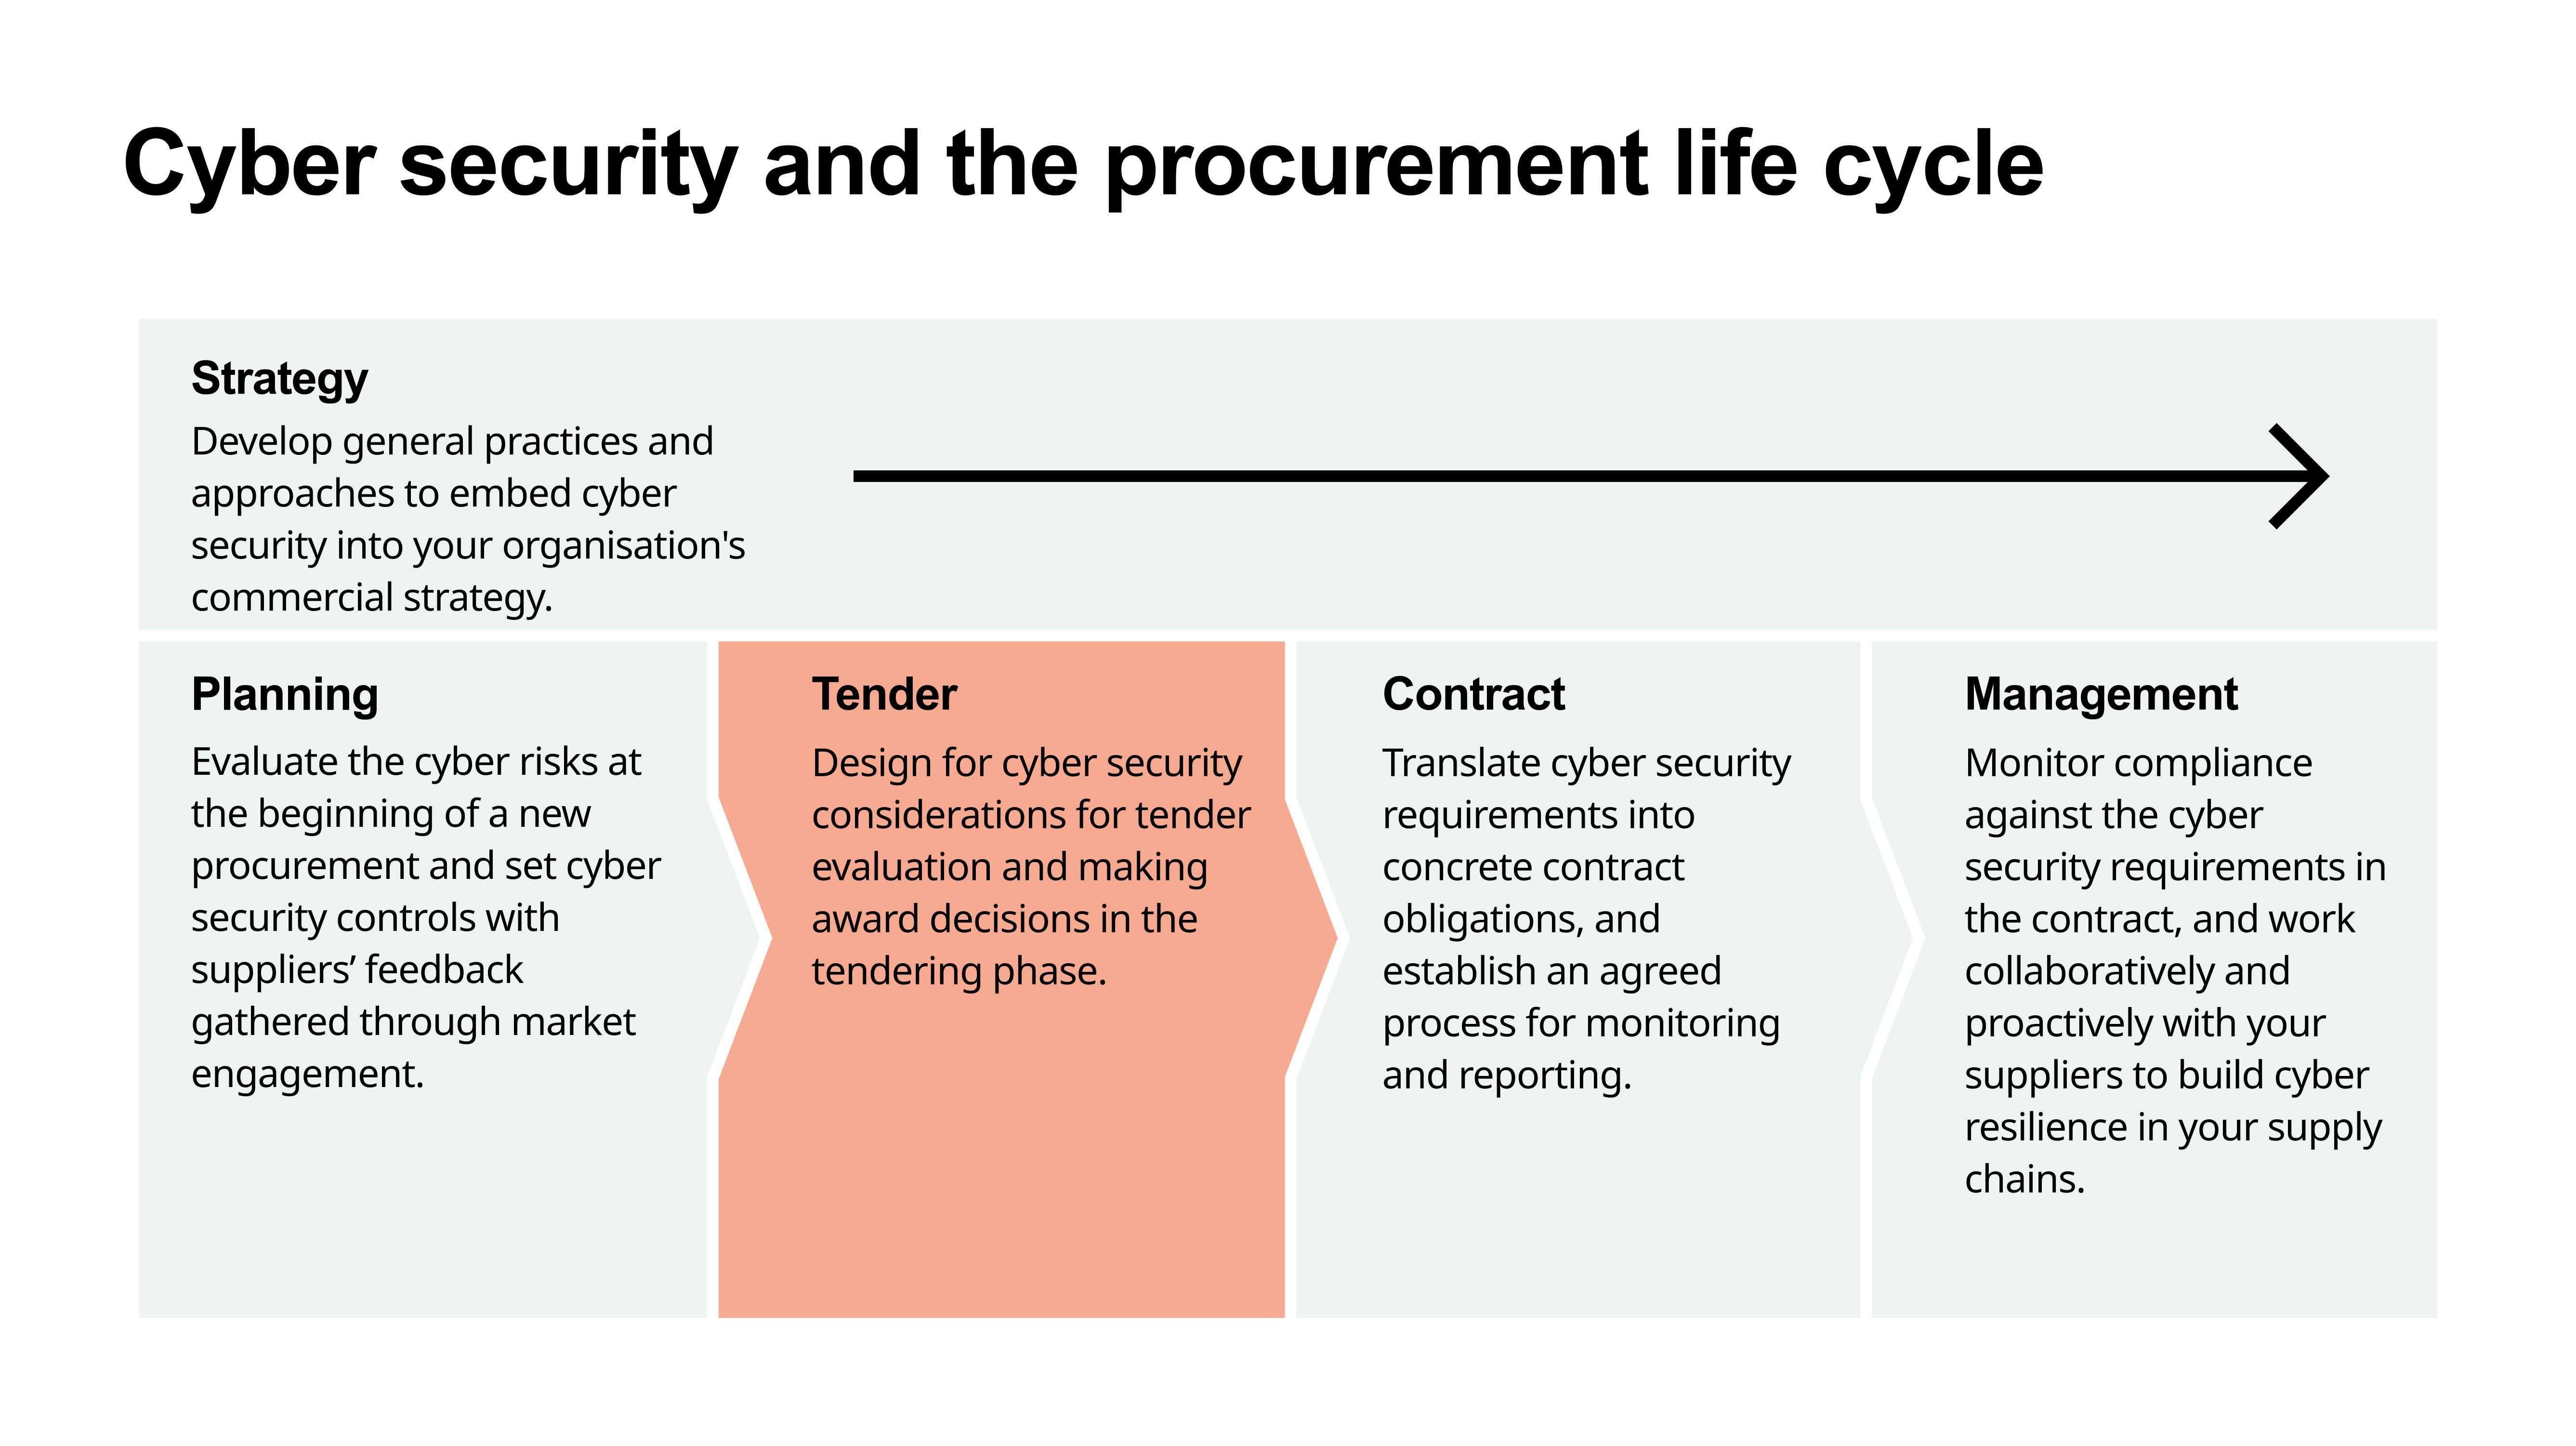 Tender in the cyber security in the procurement life cycle